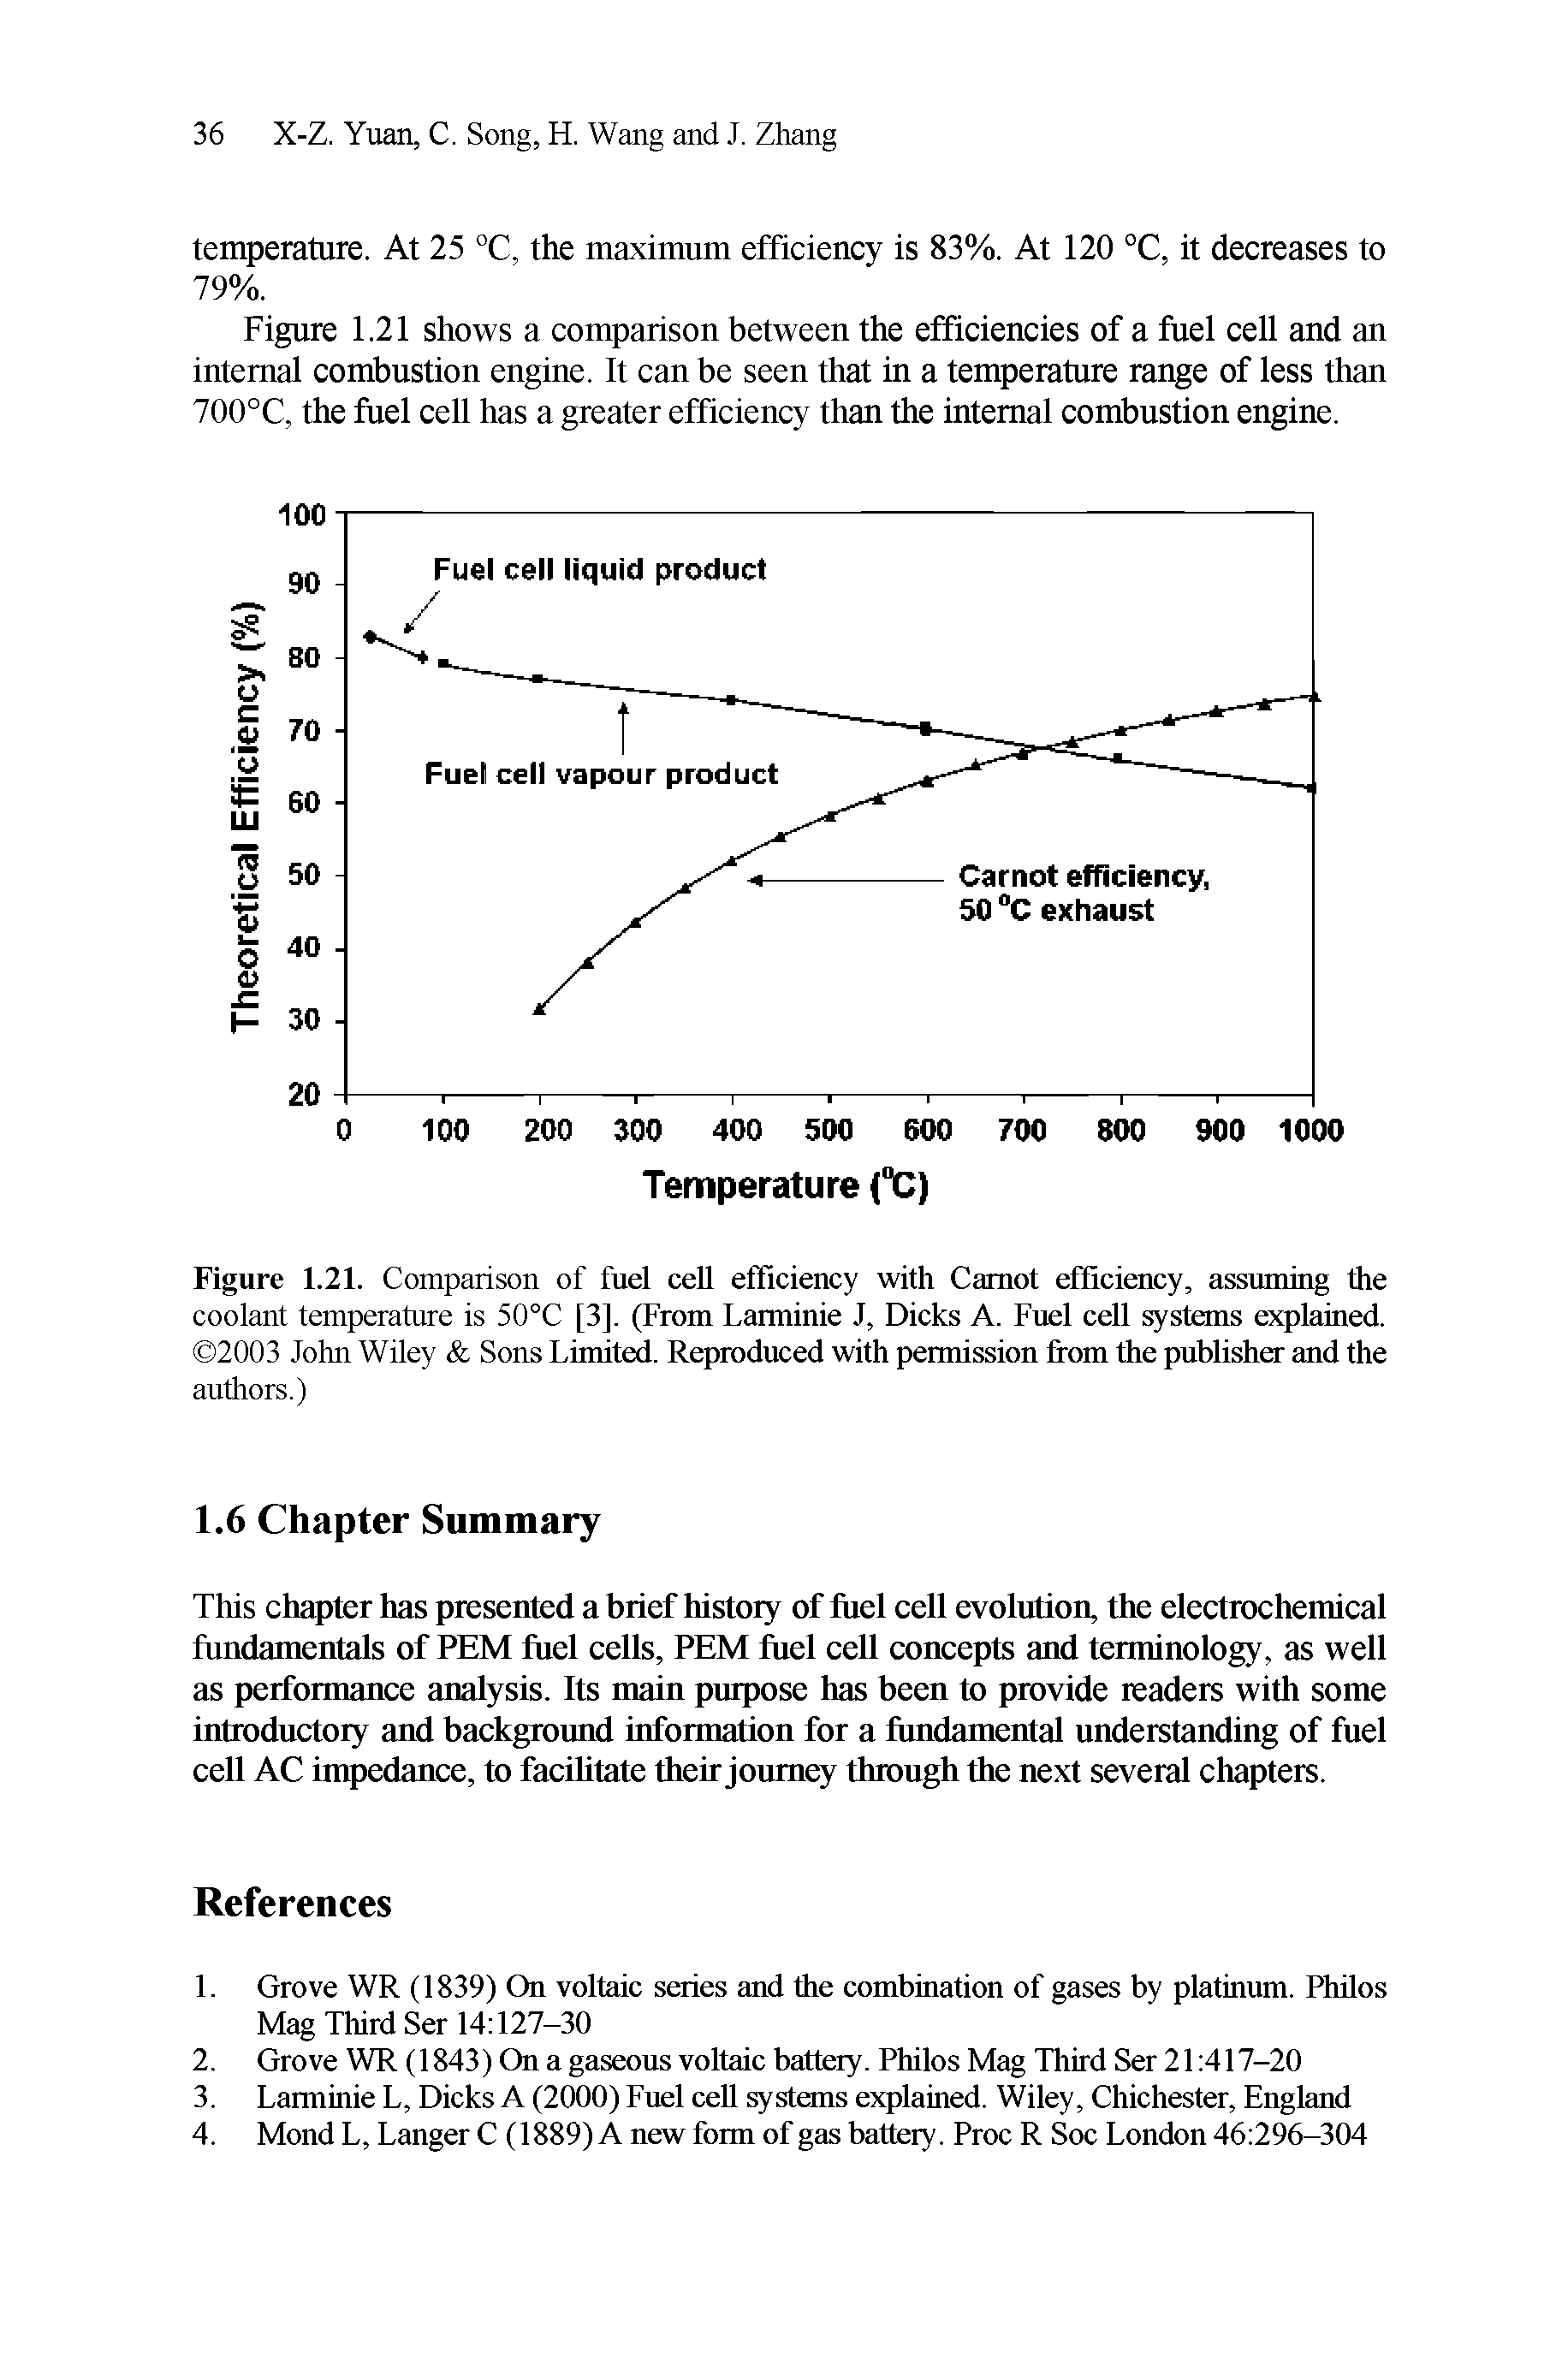 Figure 1.21. Comparison of fuel cell efficiency with Carnot efficiency, assuming the coolant temperature is 50°C [3], (From Larminie J, Dicks A. Fuel cell systems explained. 2003 John Wiley Sons Limited. Reproduced with permission from the publisher and the...